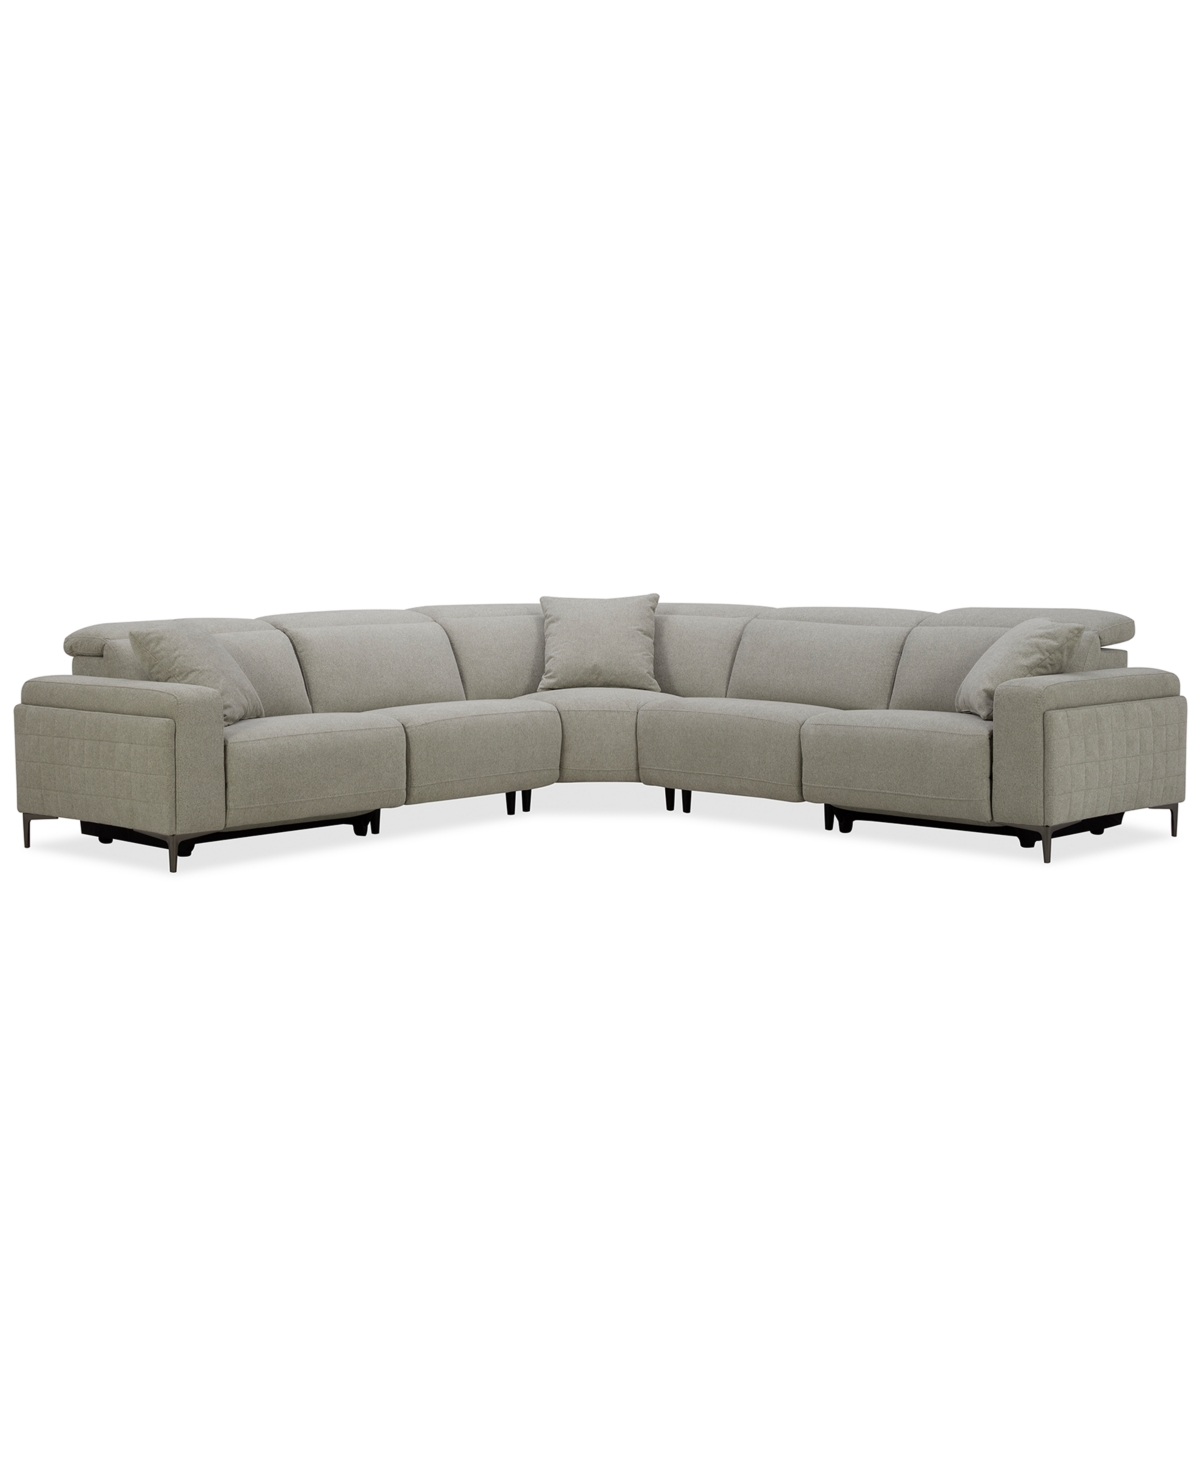 Furniture Adney 128" 5 Pc Zero Gravity Fabric Sectional With 2 Power Recliners, Created For Macy's In Metal